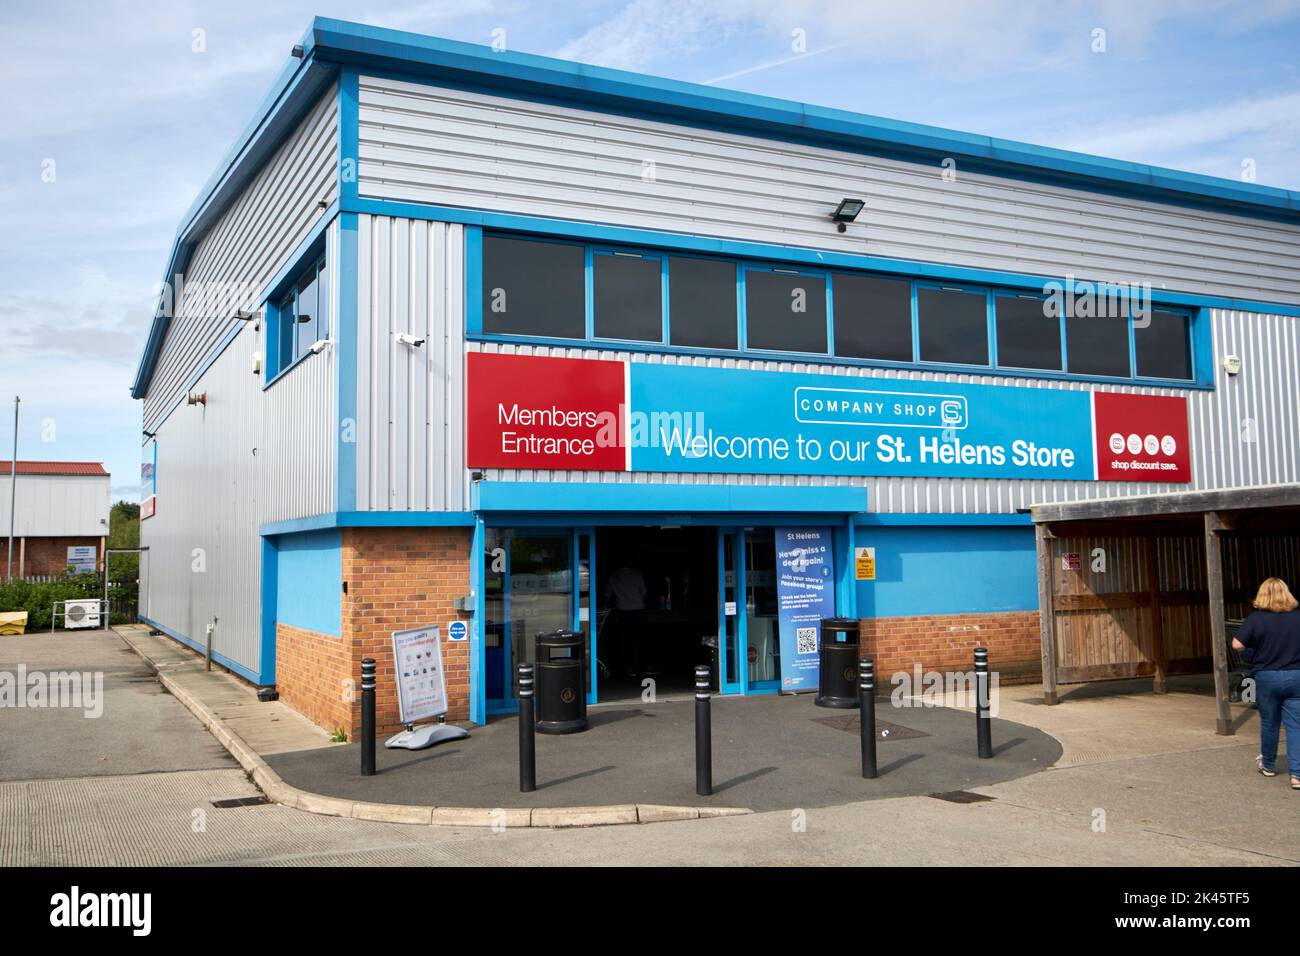 the company shop store in st helens merseyside uk social enterprise store specialising in surplus products Stock Photo